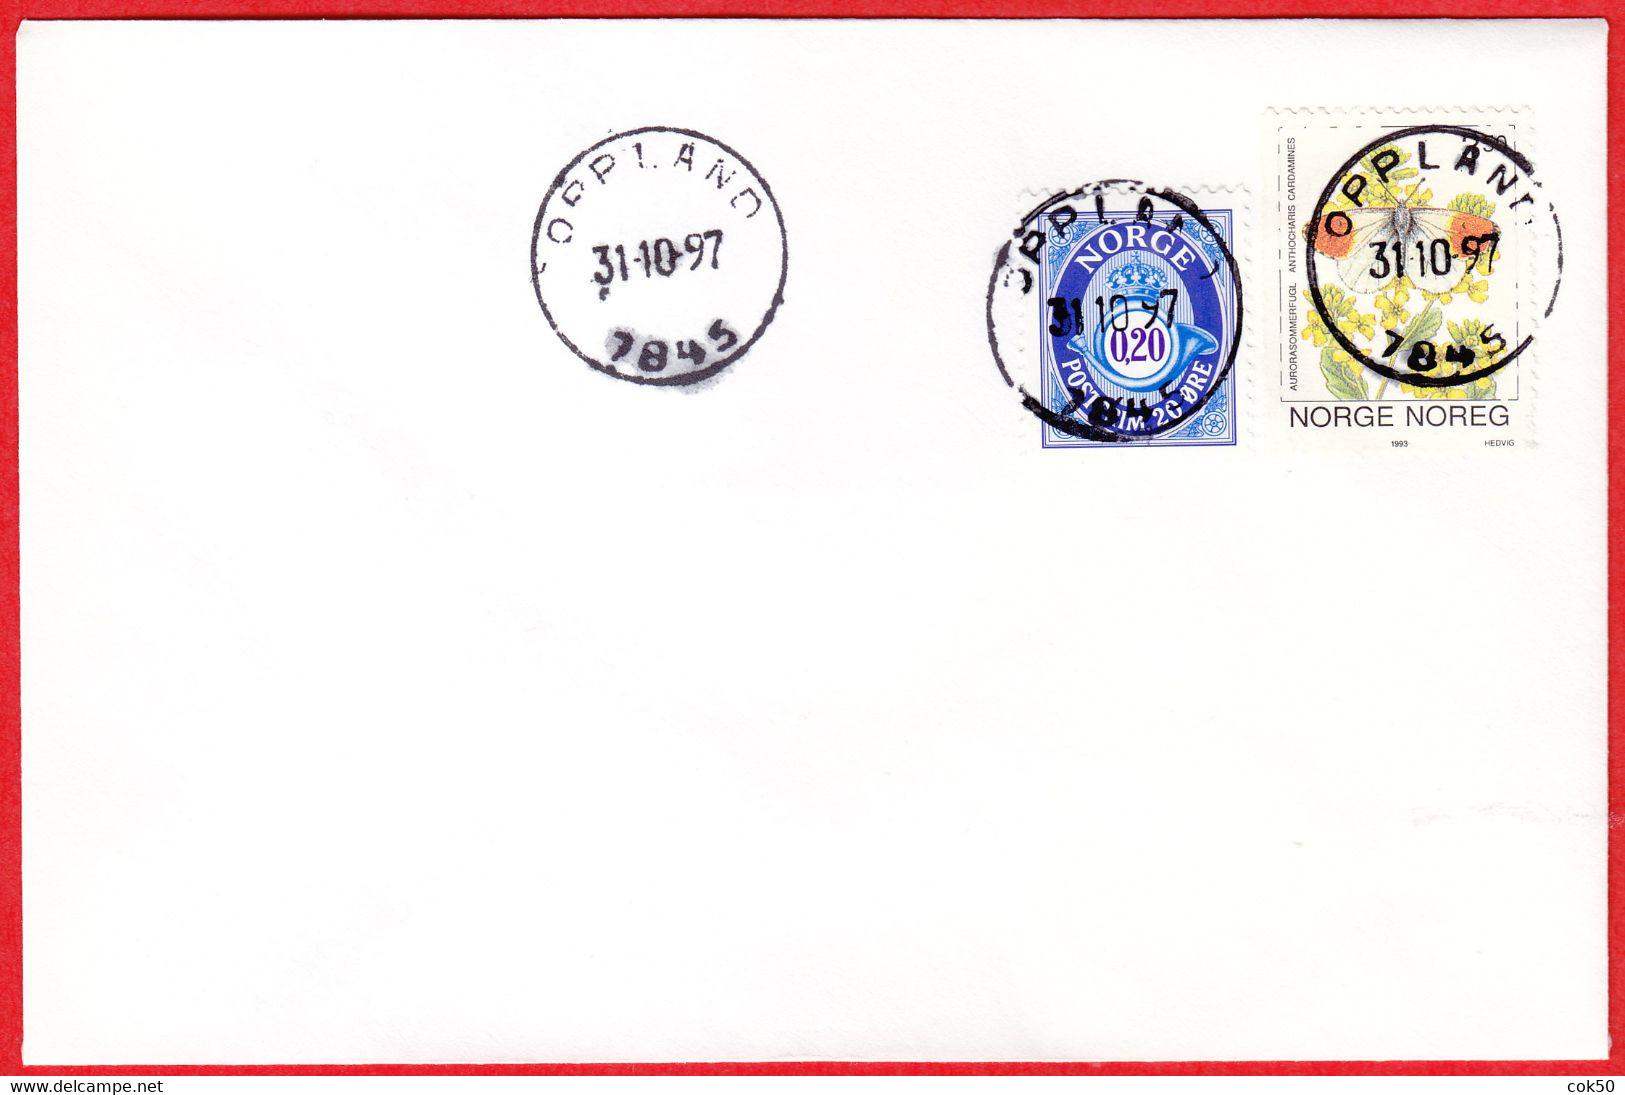 NORWAY -  7845 OPPLAND (Trøndelag County) - Last Day/postoffice Closed On 1997.10.31 - Local Post Stamps